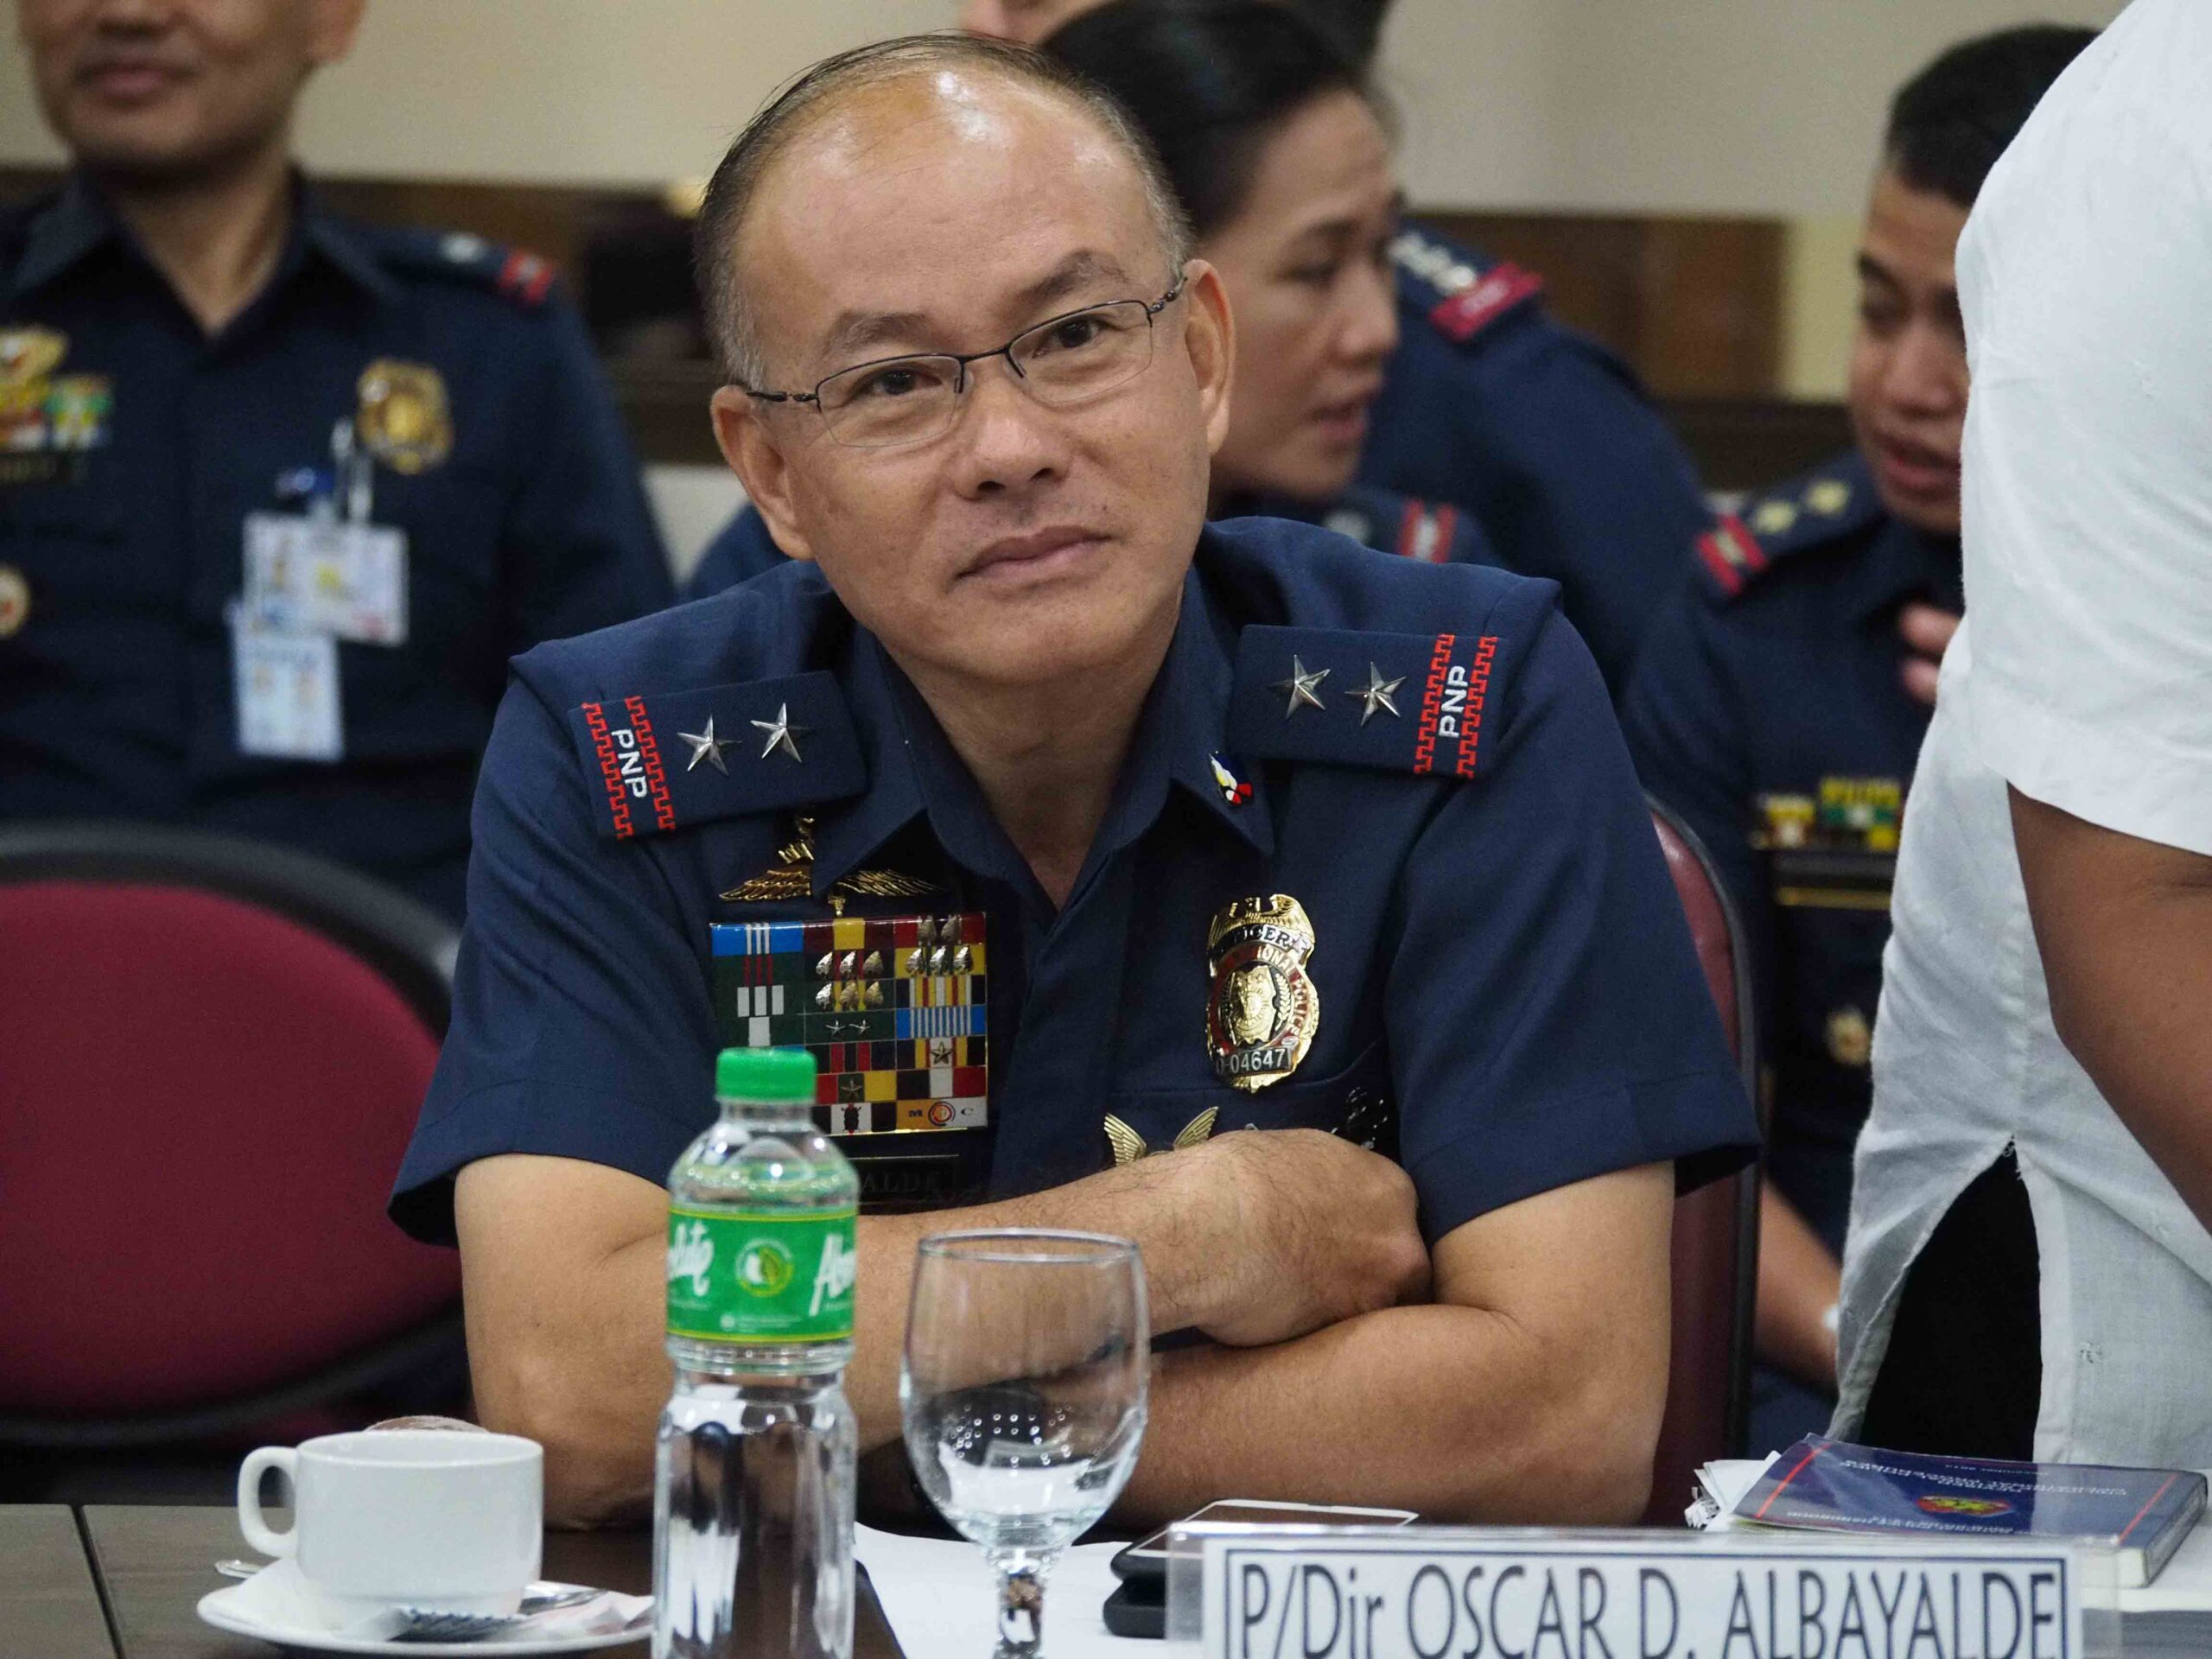 Police generals won’t be spared in Albayalde’s sacking spree